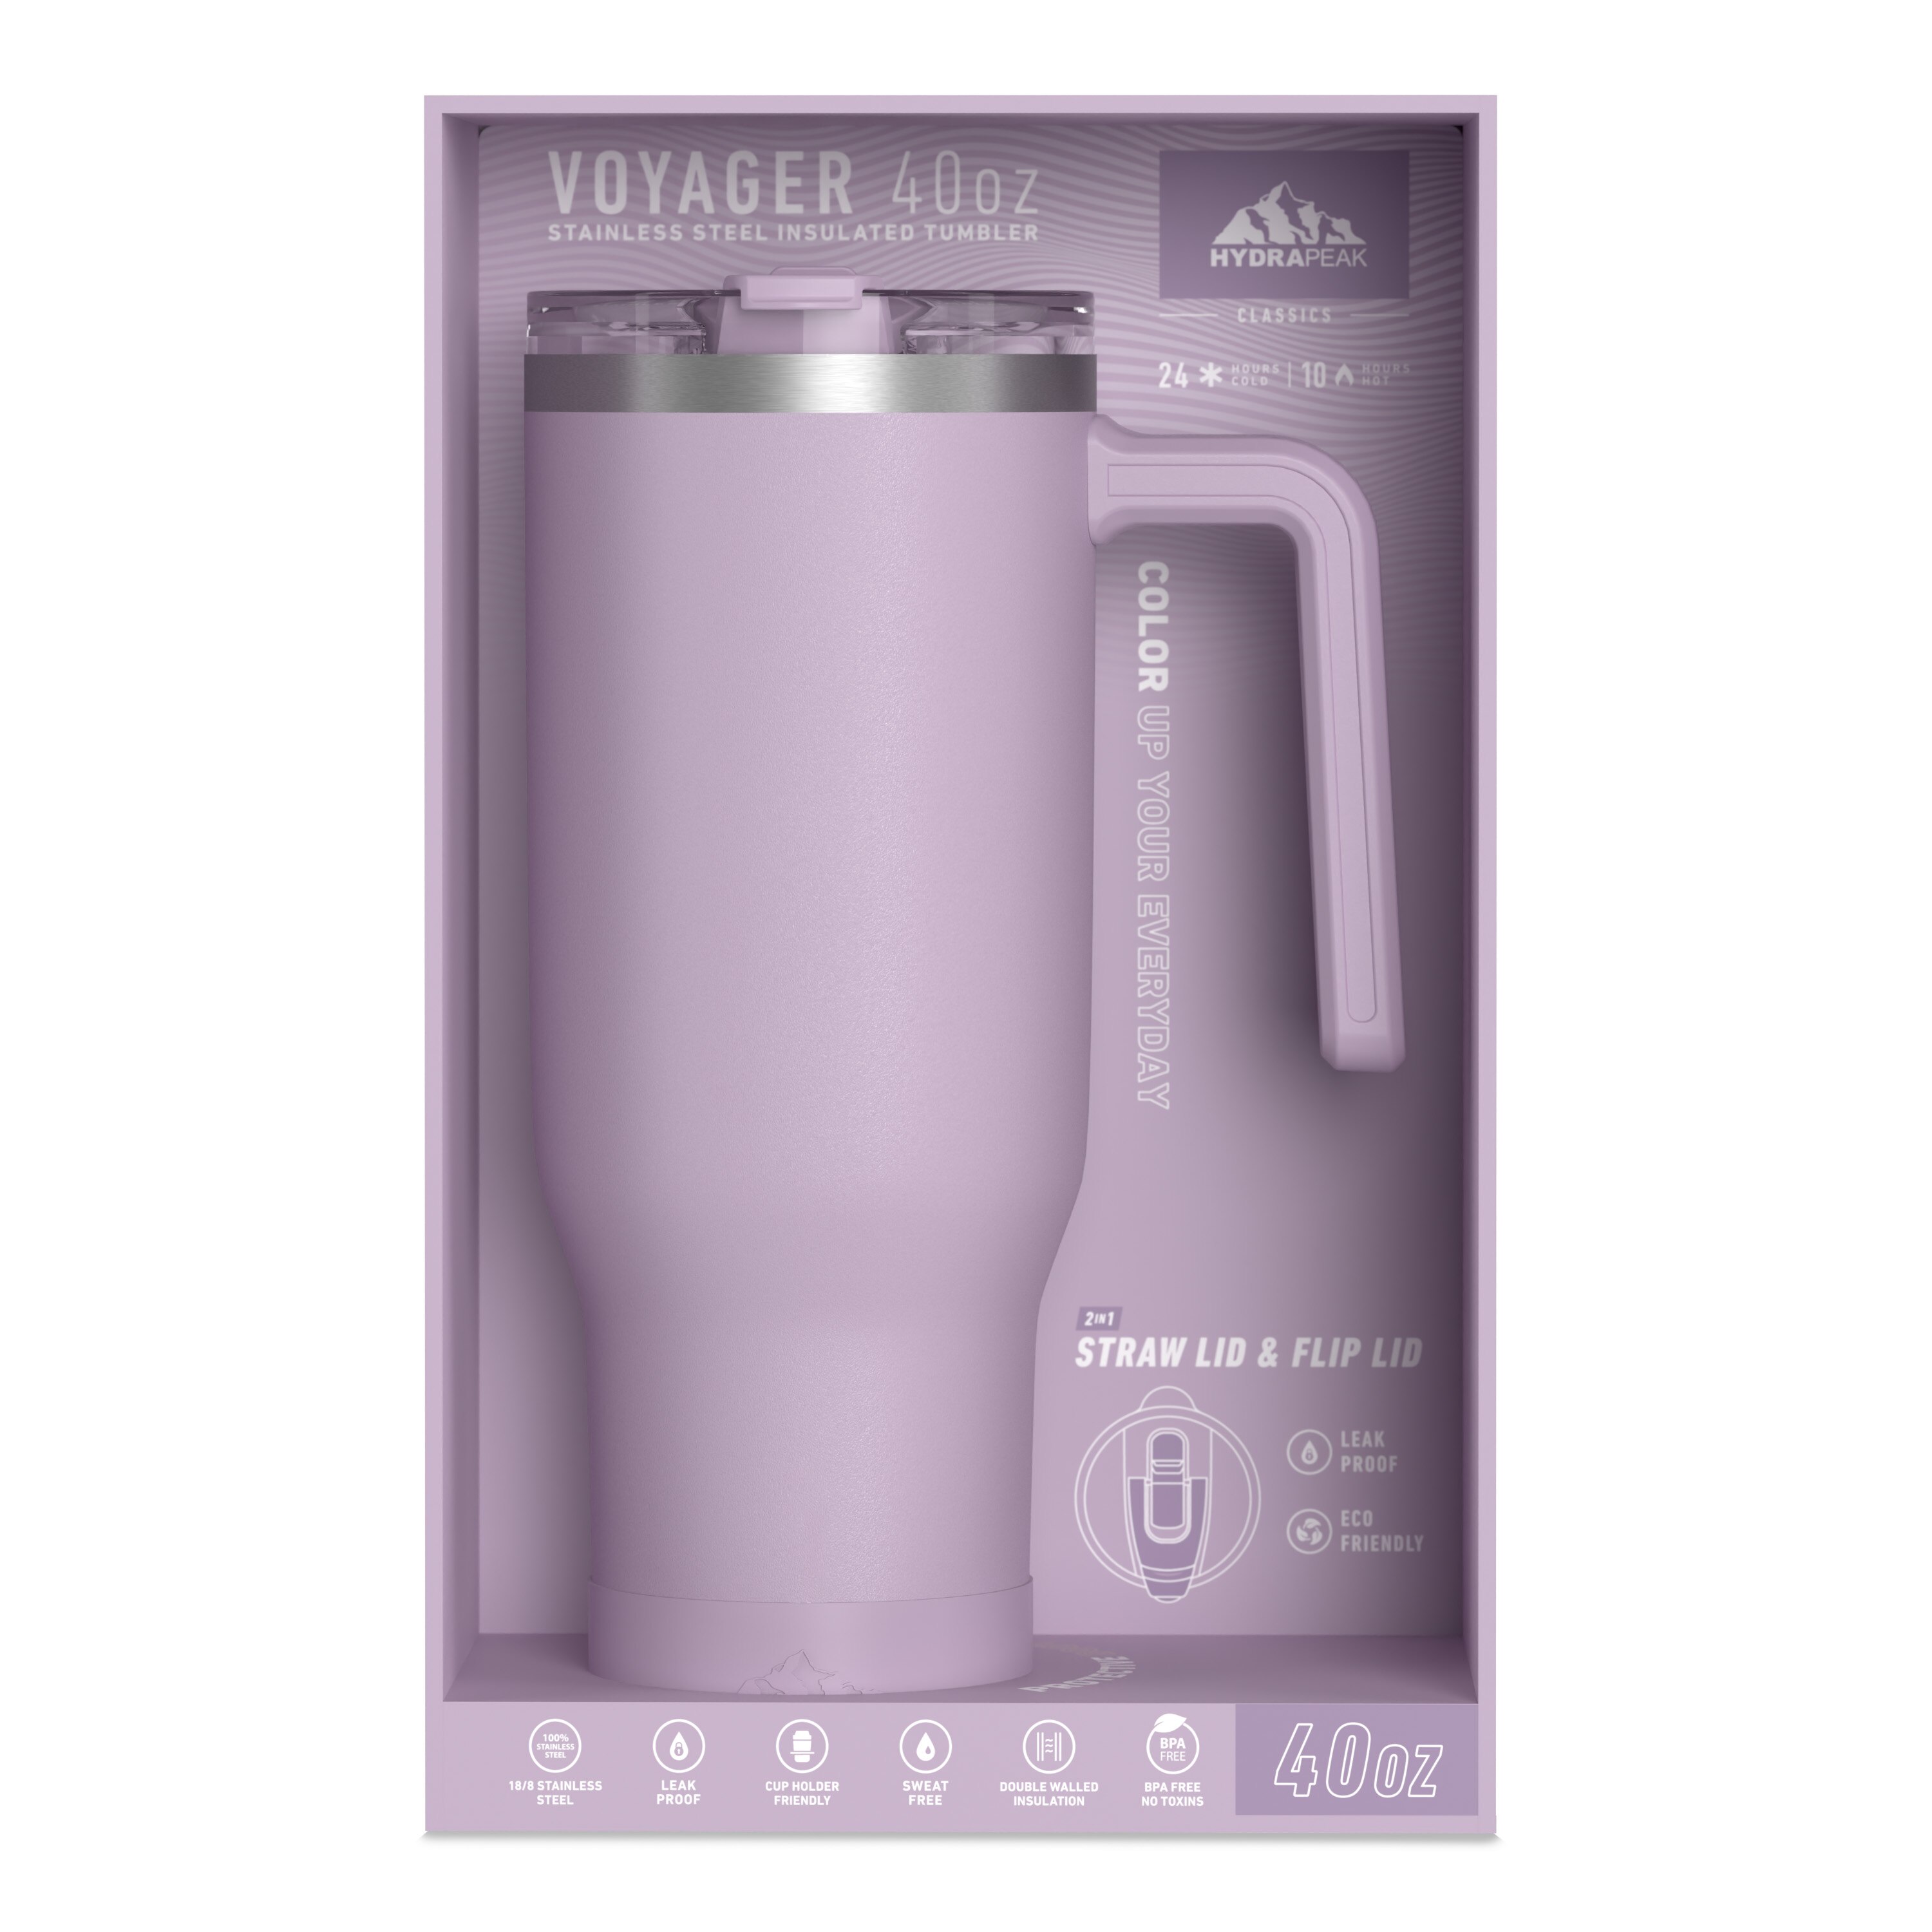 Simple Modern Voyager 16oz Stainless Steel Travel Mug With